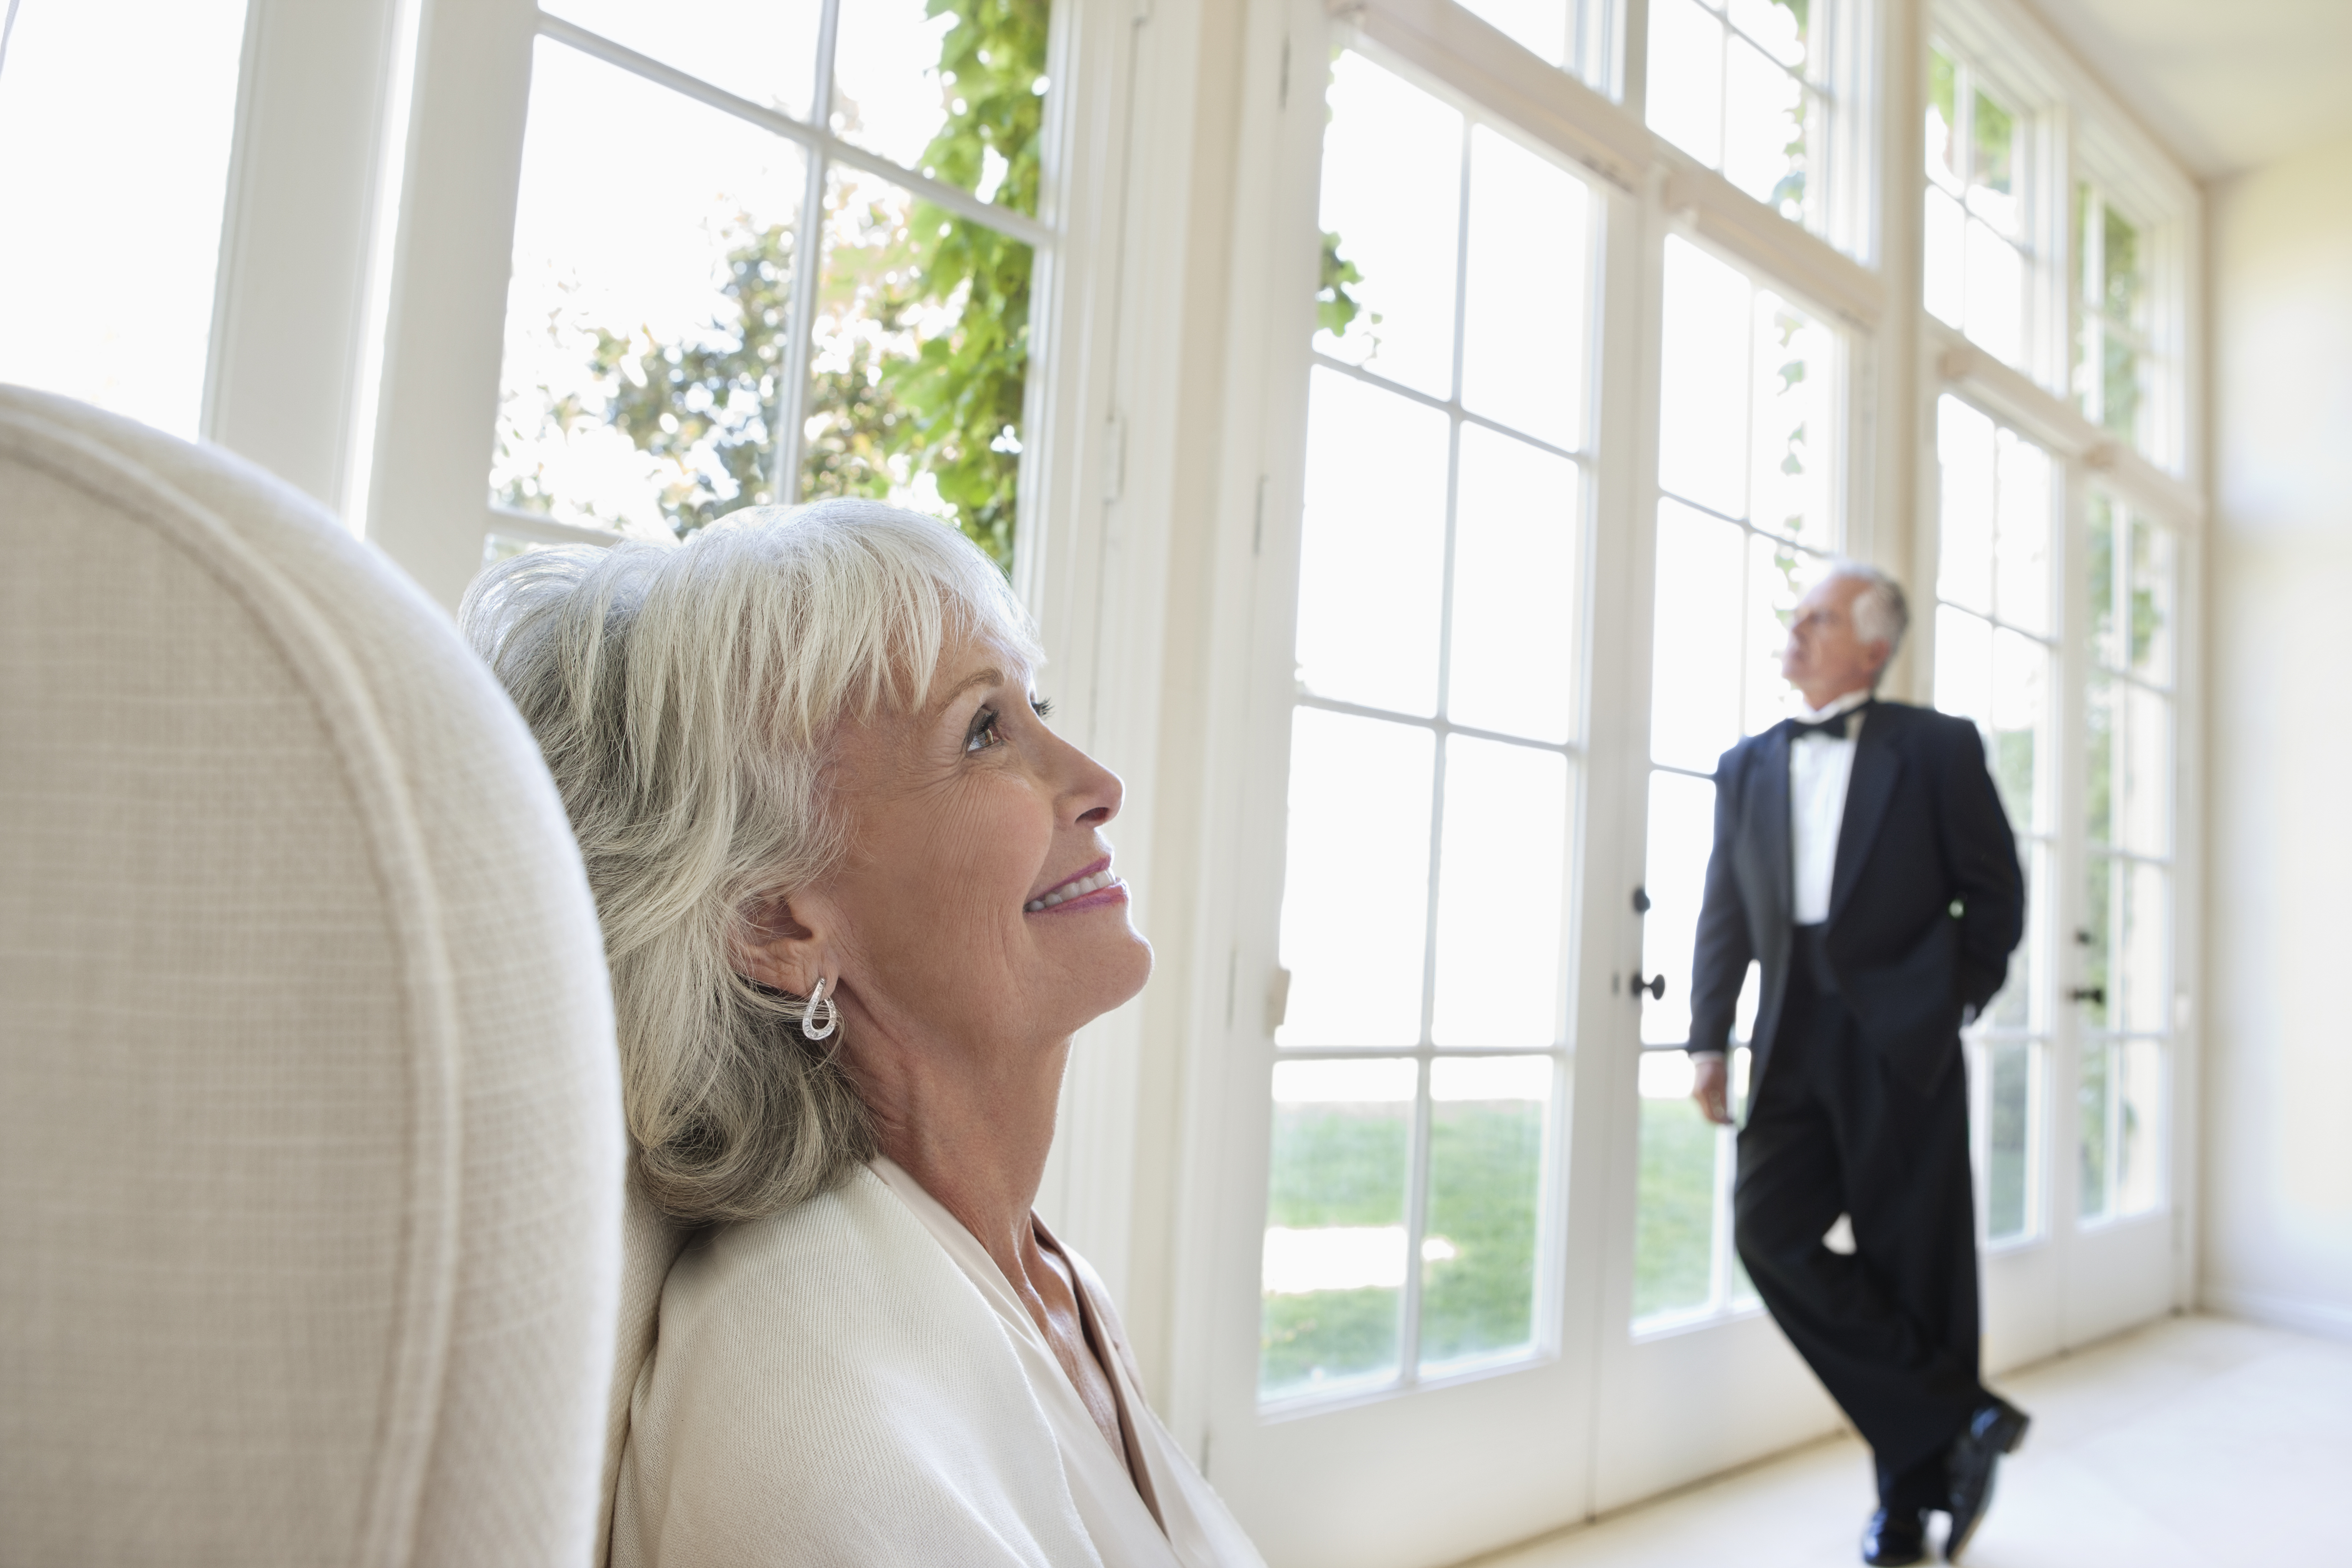 Well-dressed senior couple in living room | Source: Getty Images